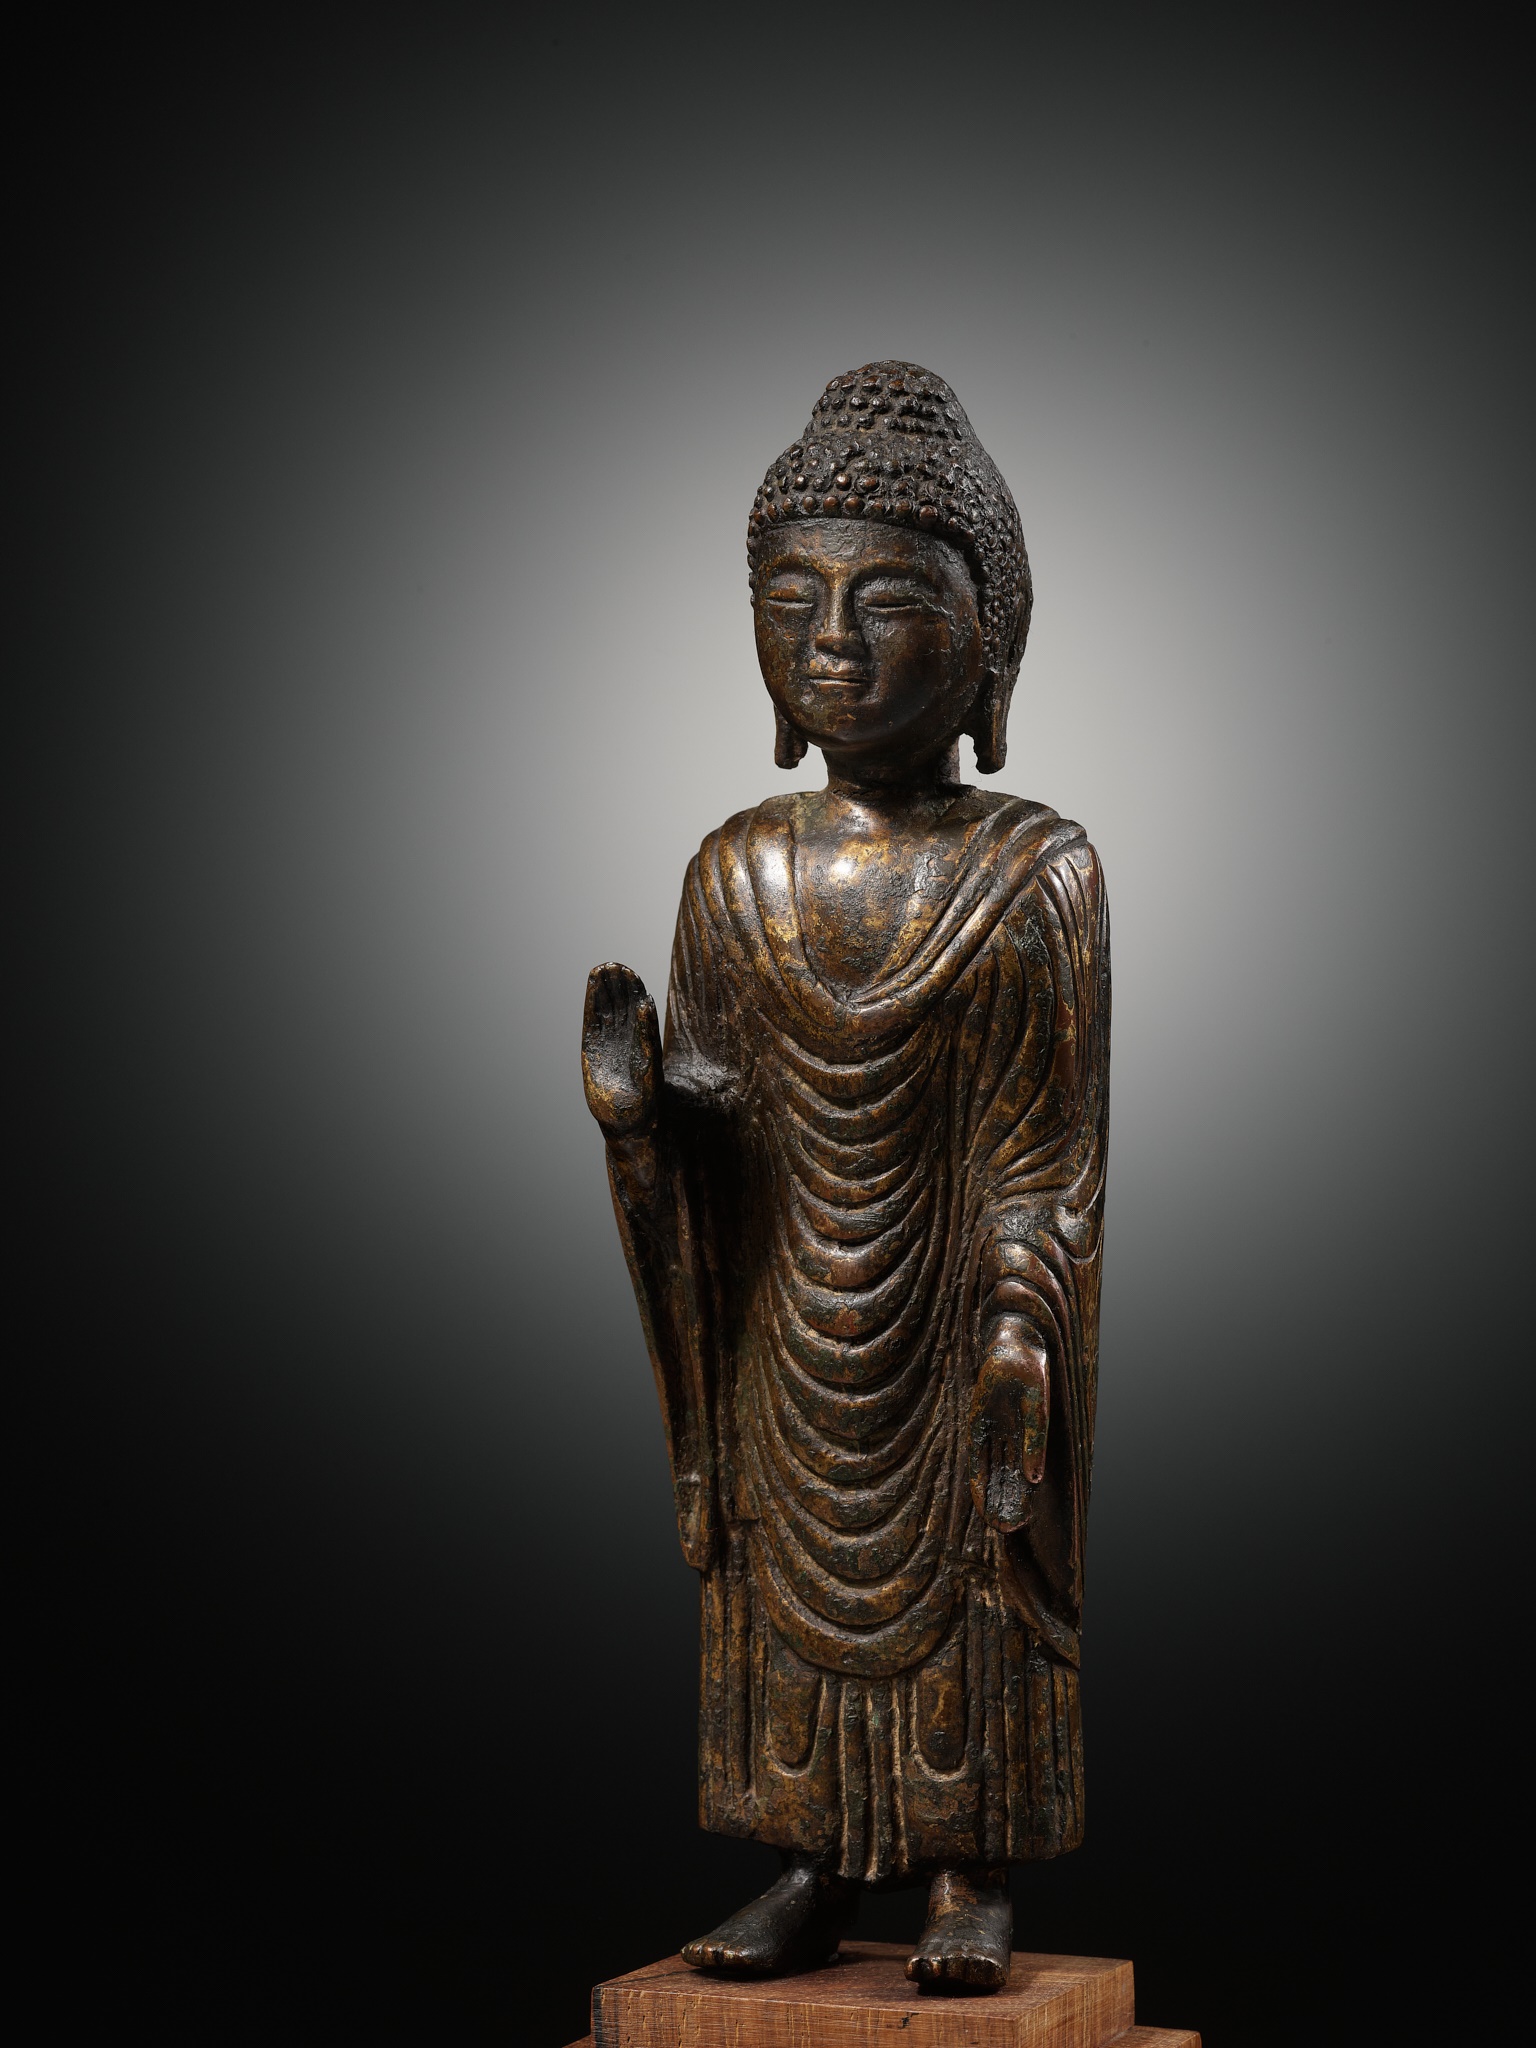 A GILT-BRONZE STANDING FIGURE OF BUDDHA, UNIFIED SILLA DYNASTY, KOREA, 8TH - 9TH CENTURY - Image 7 of 12